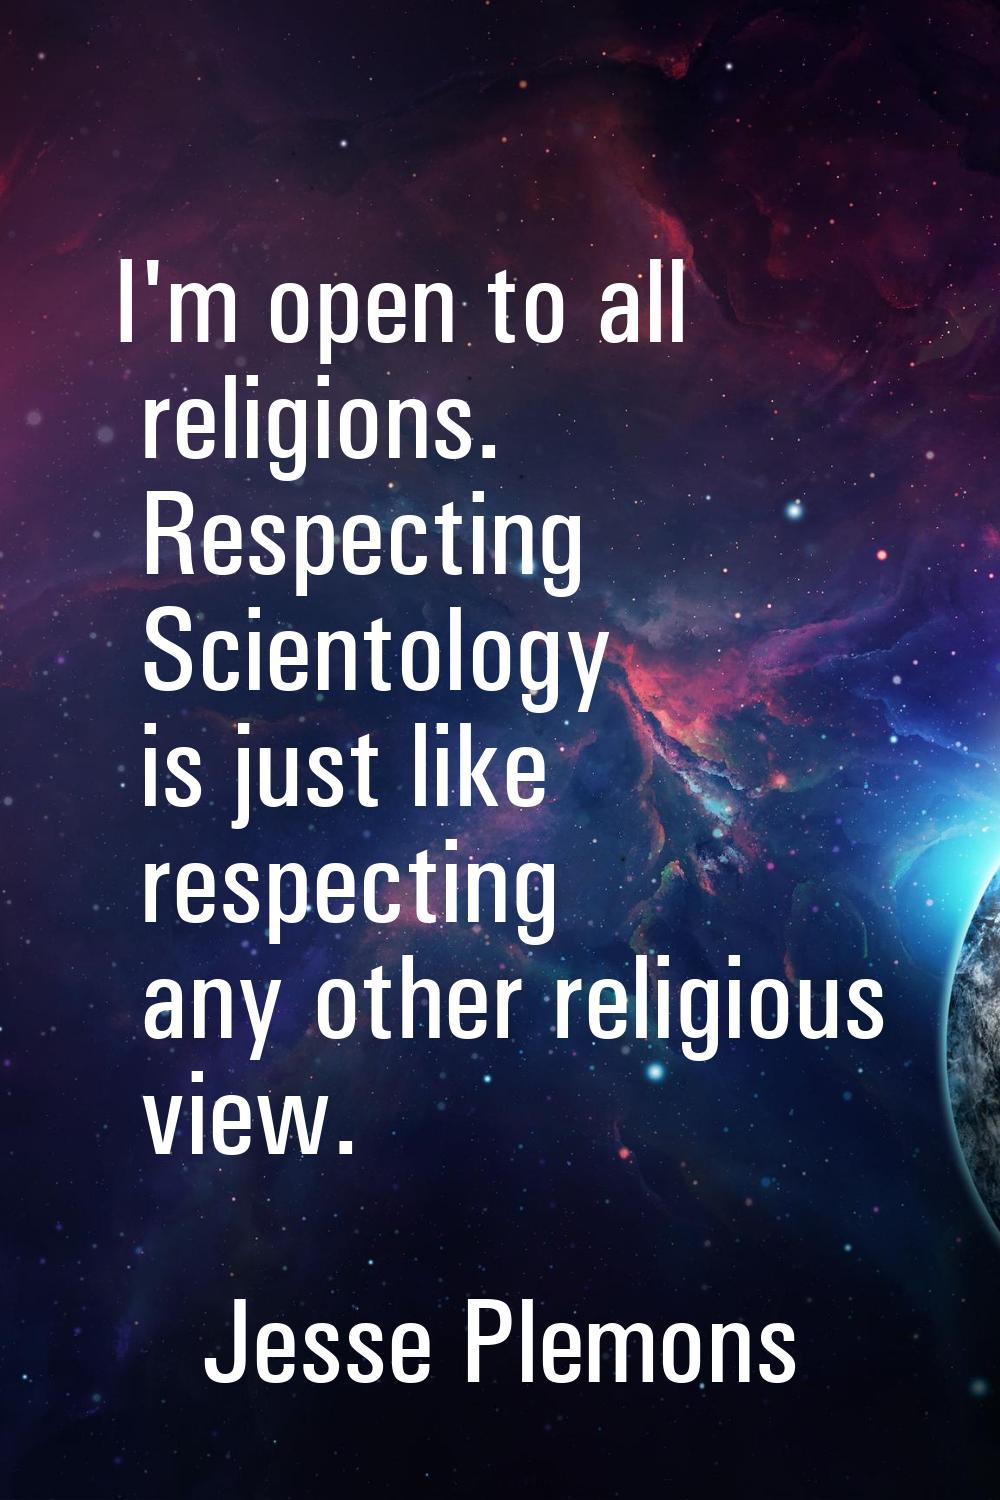 I'm open to all religions. Respecting Scientology is just like respecting any other religious view.